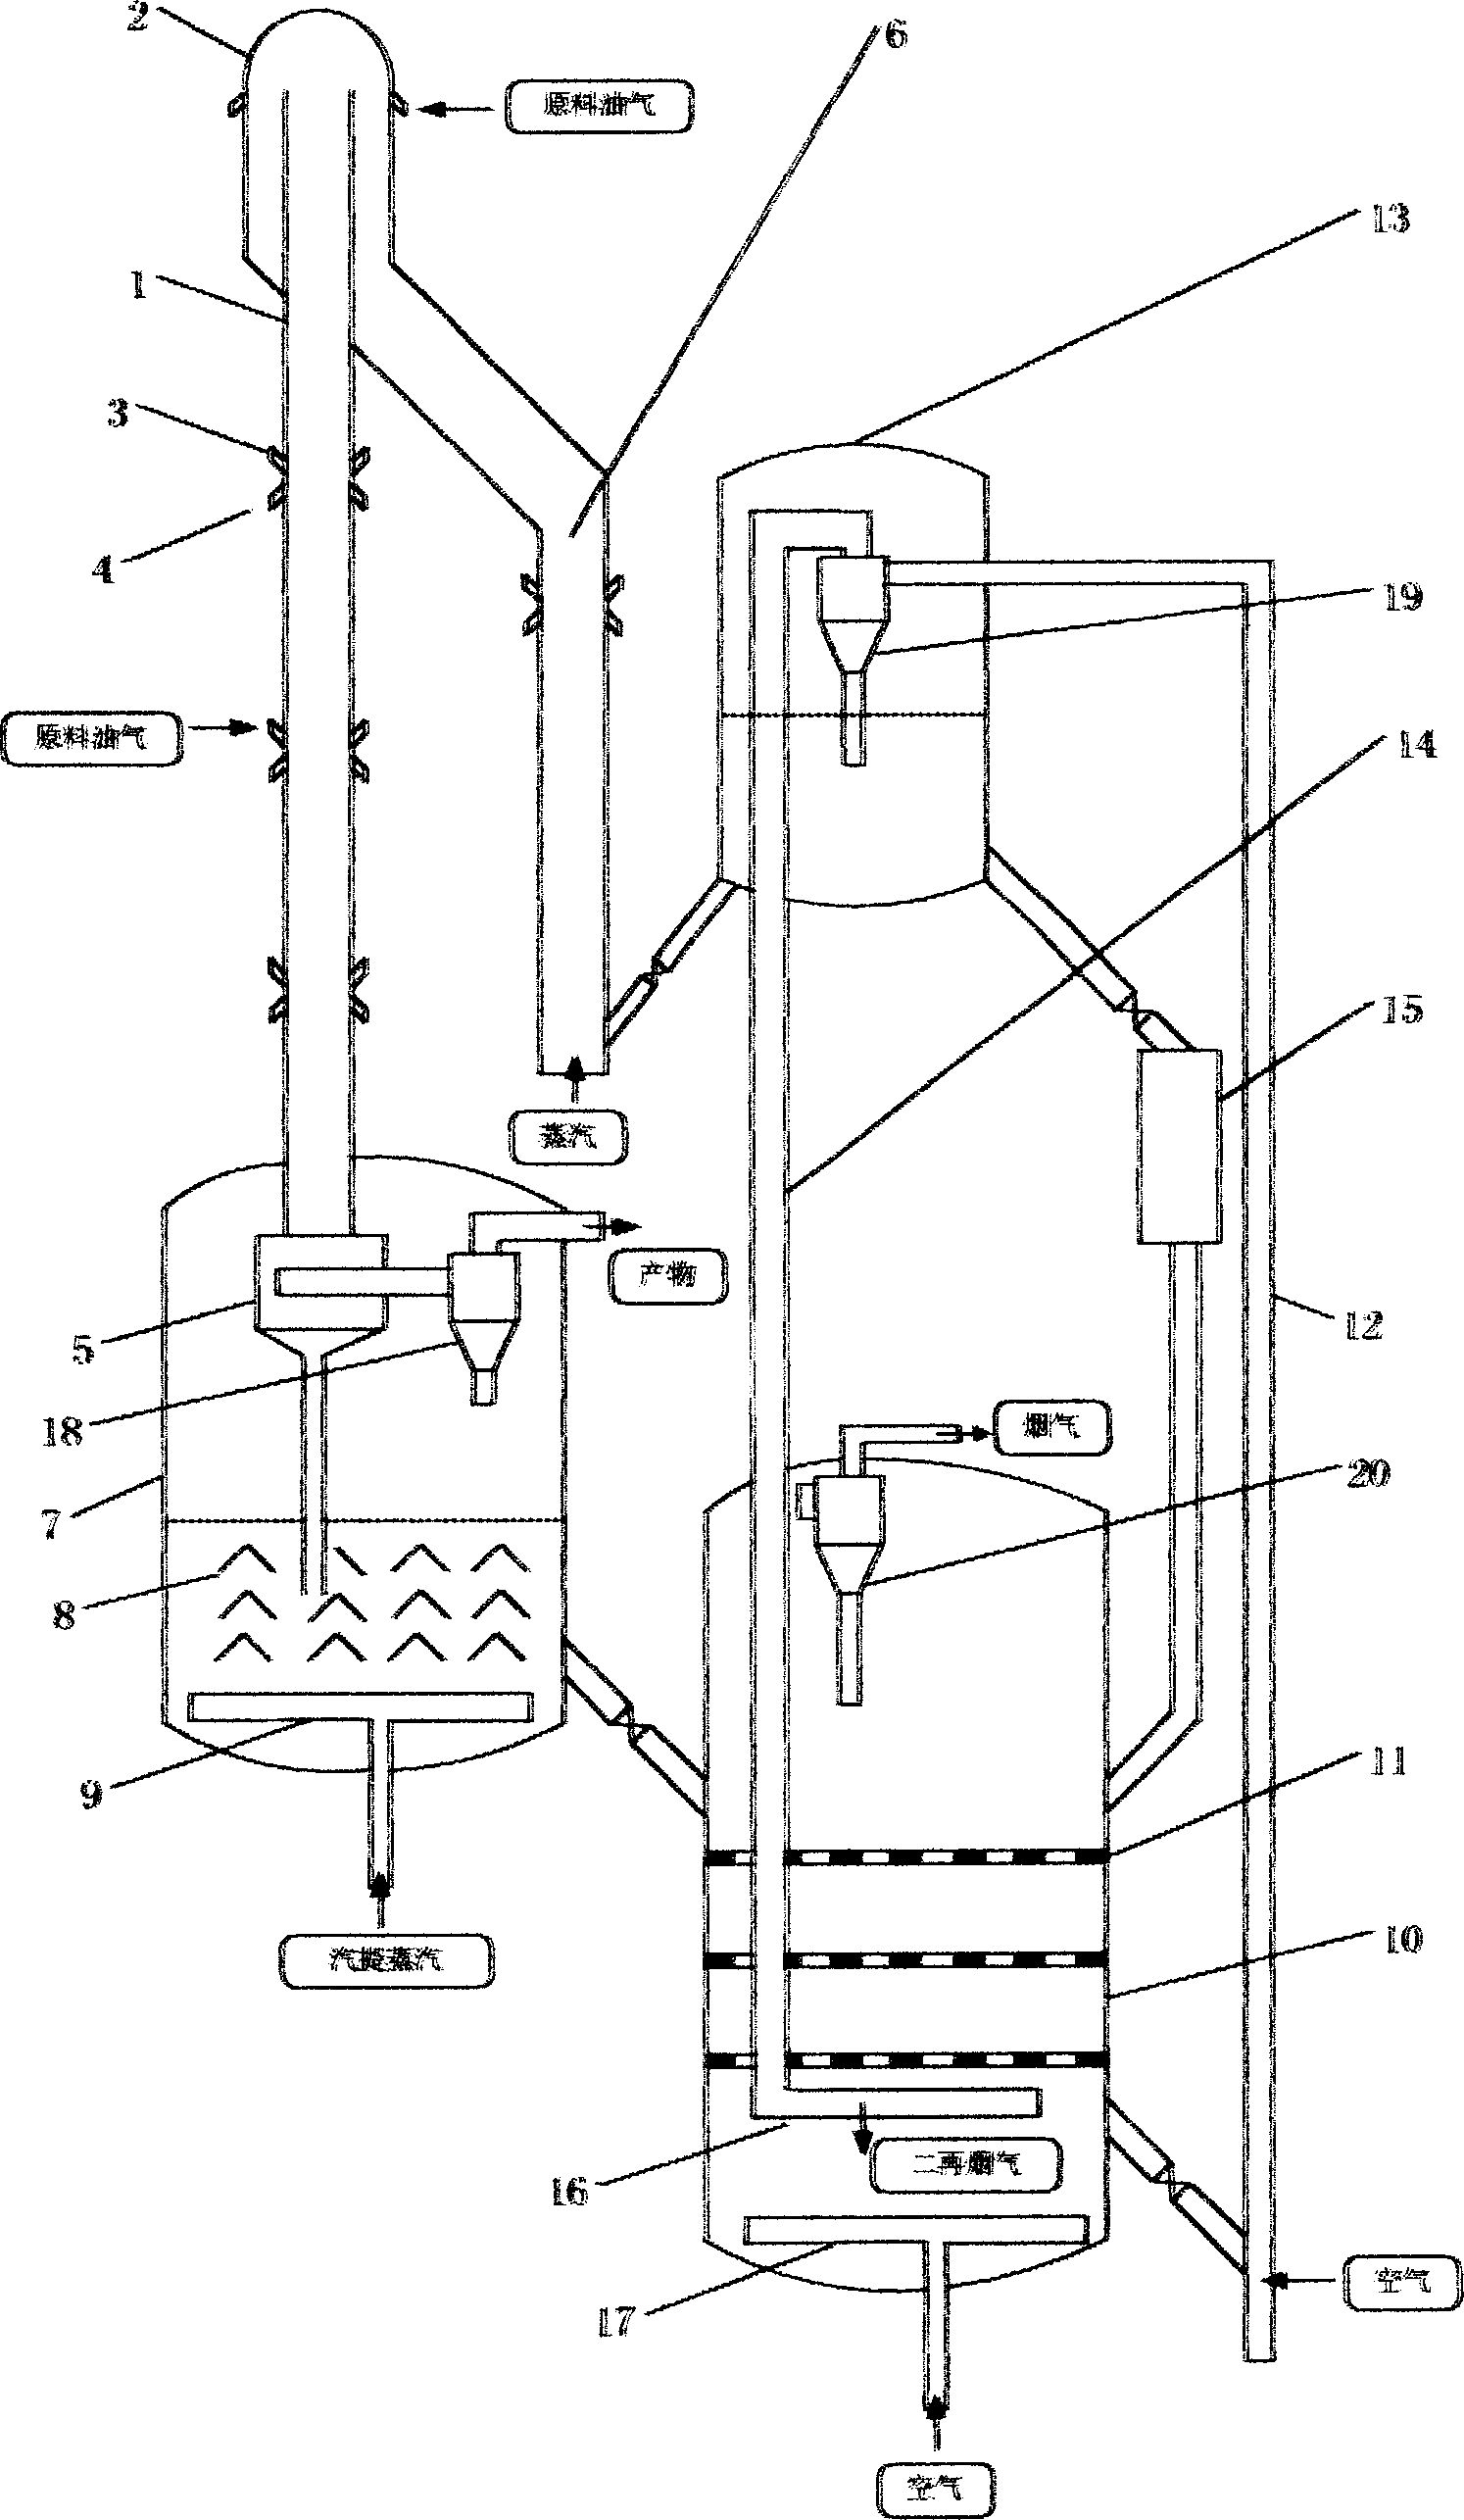 Down-flow catalytic cracking/ cracking reactor for processing heavy raw oil